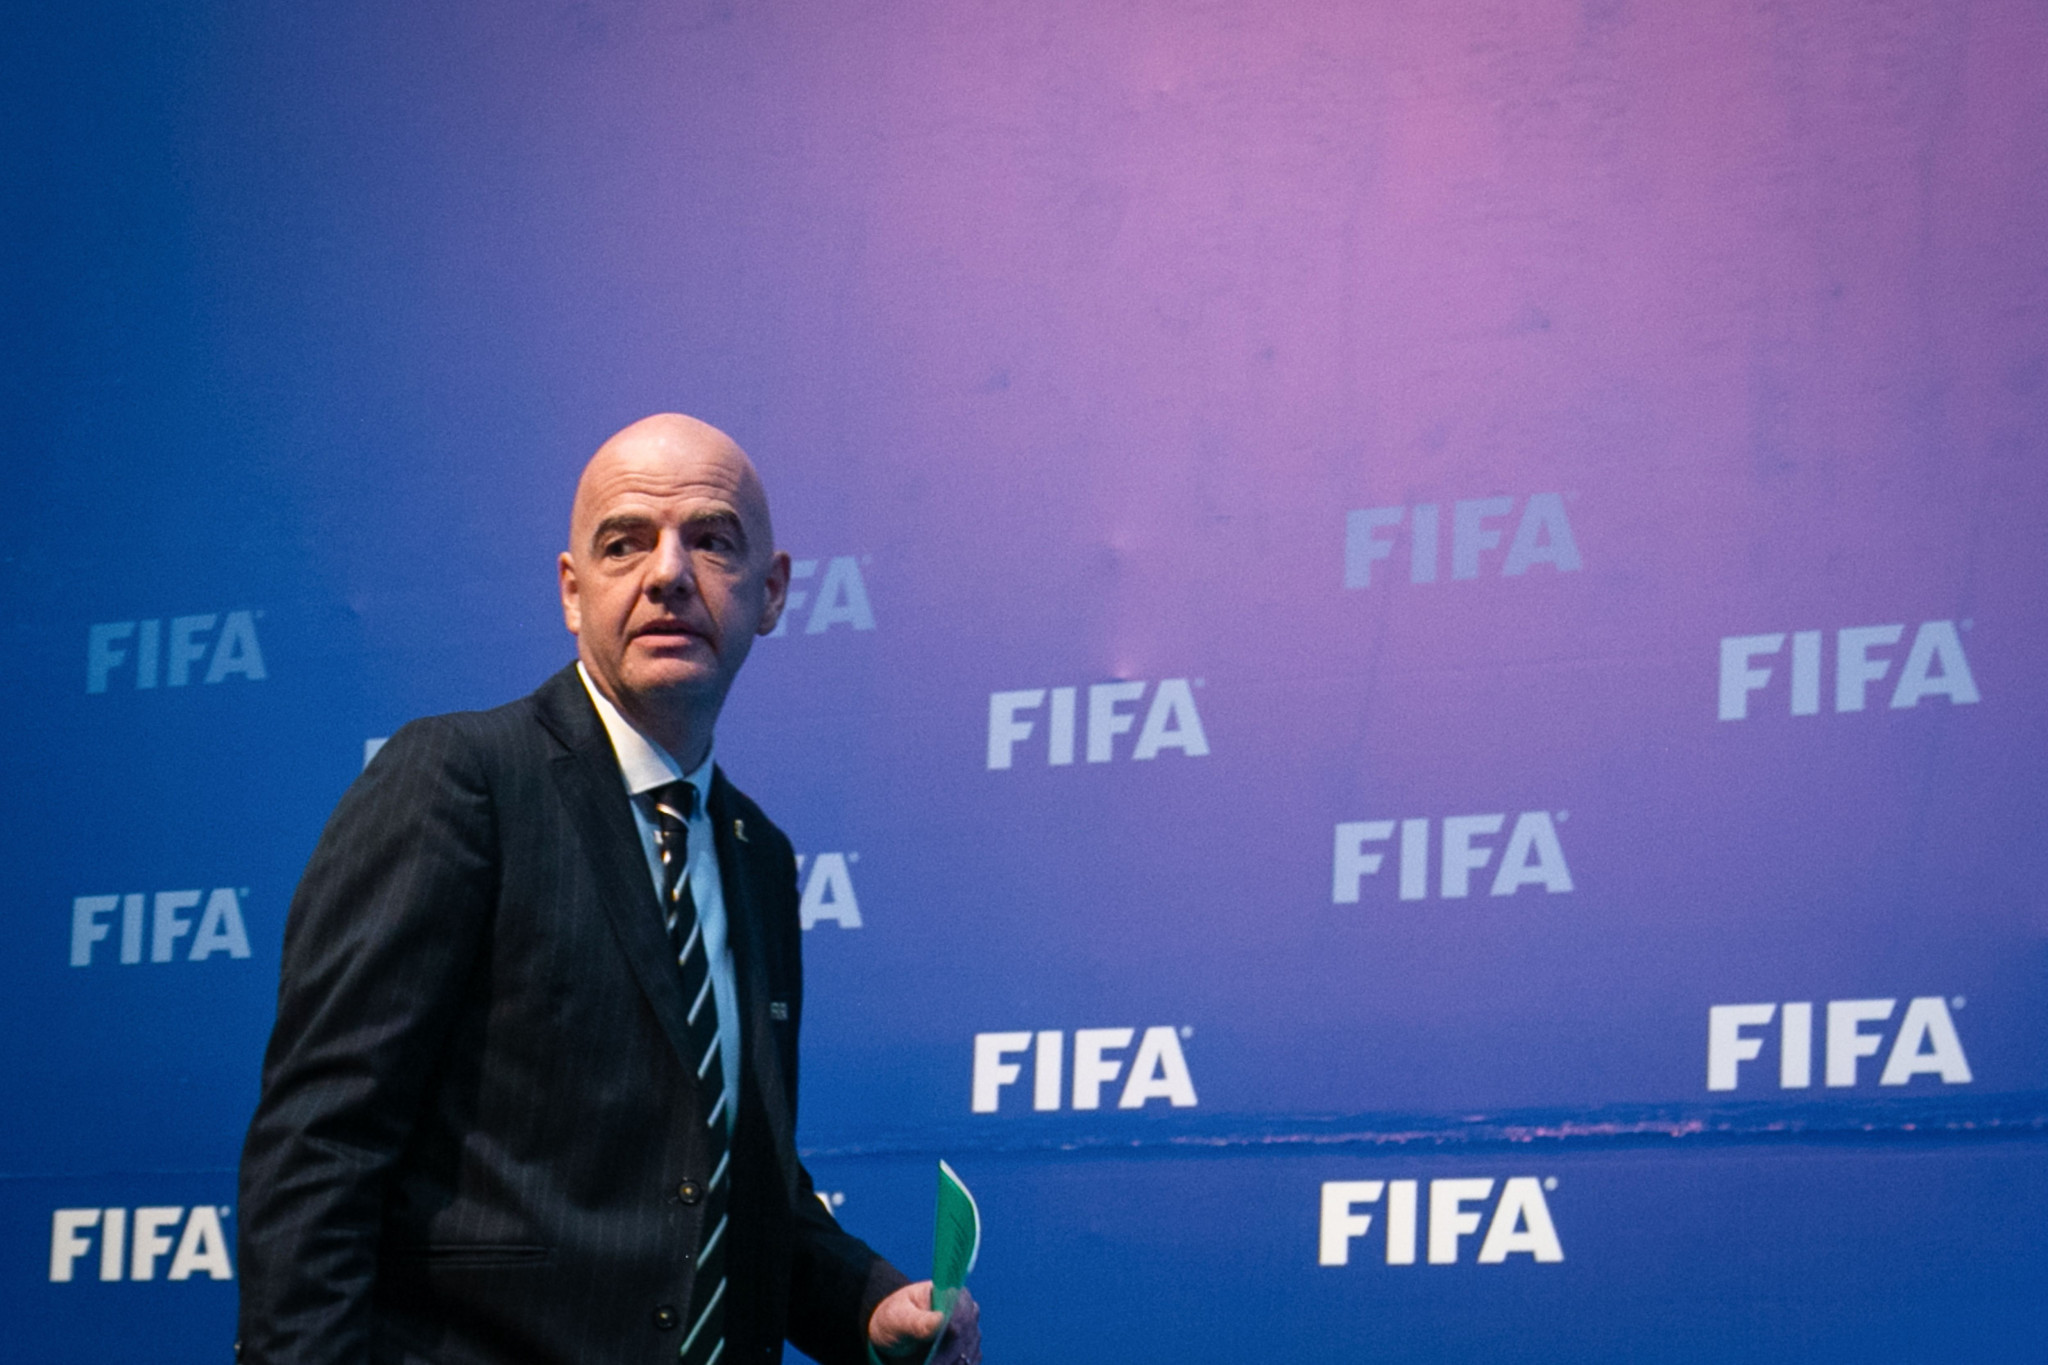 FIFA President Gianni Infantino said the changes sent an important message about their value of women's football ©Getty Images